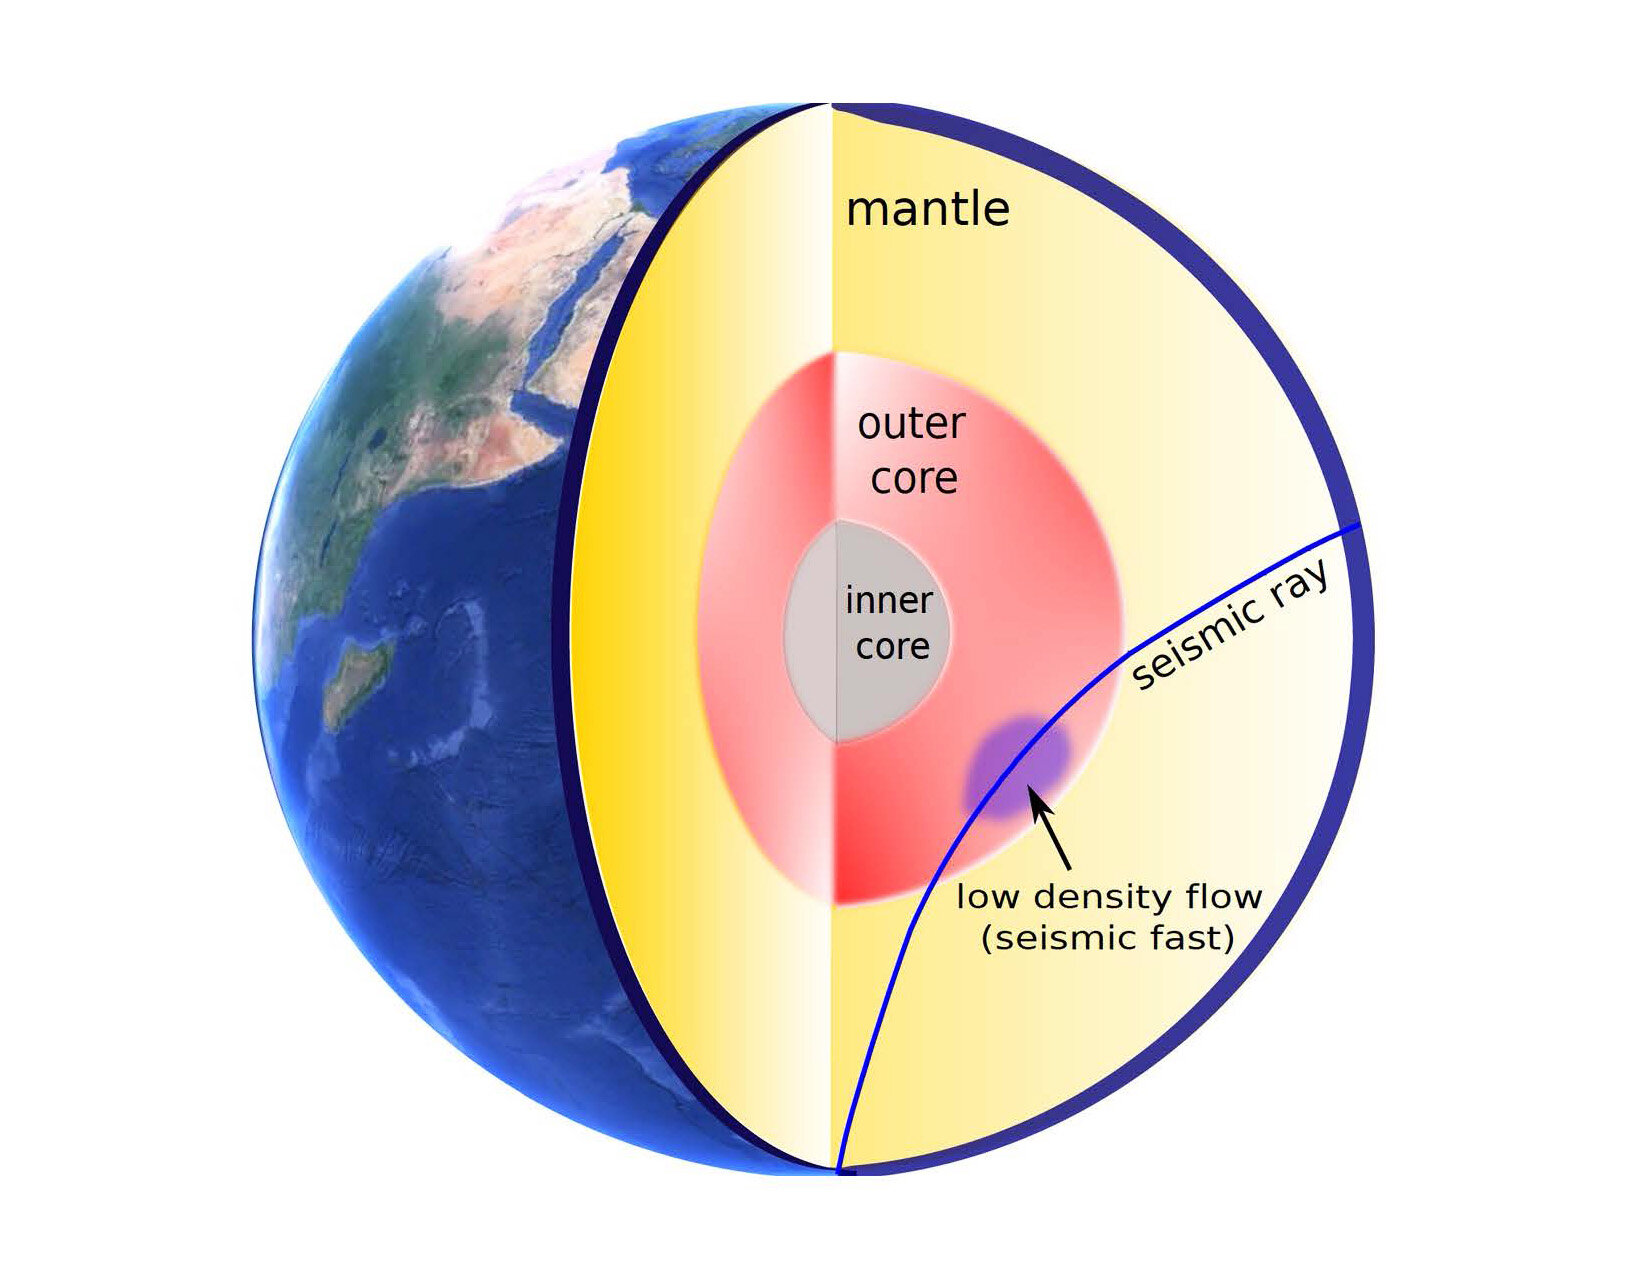 Seismic waves from earthquakes reveal changes in the Earth's outer core